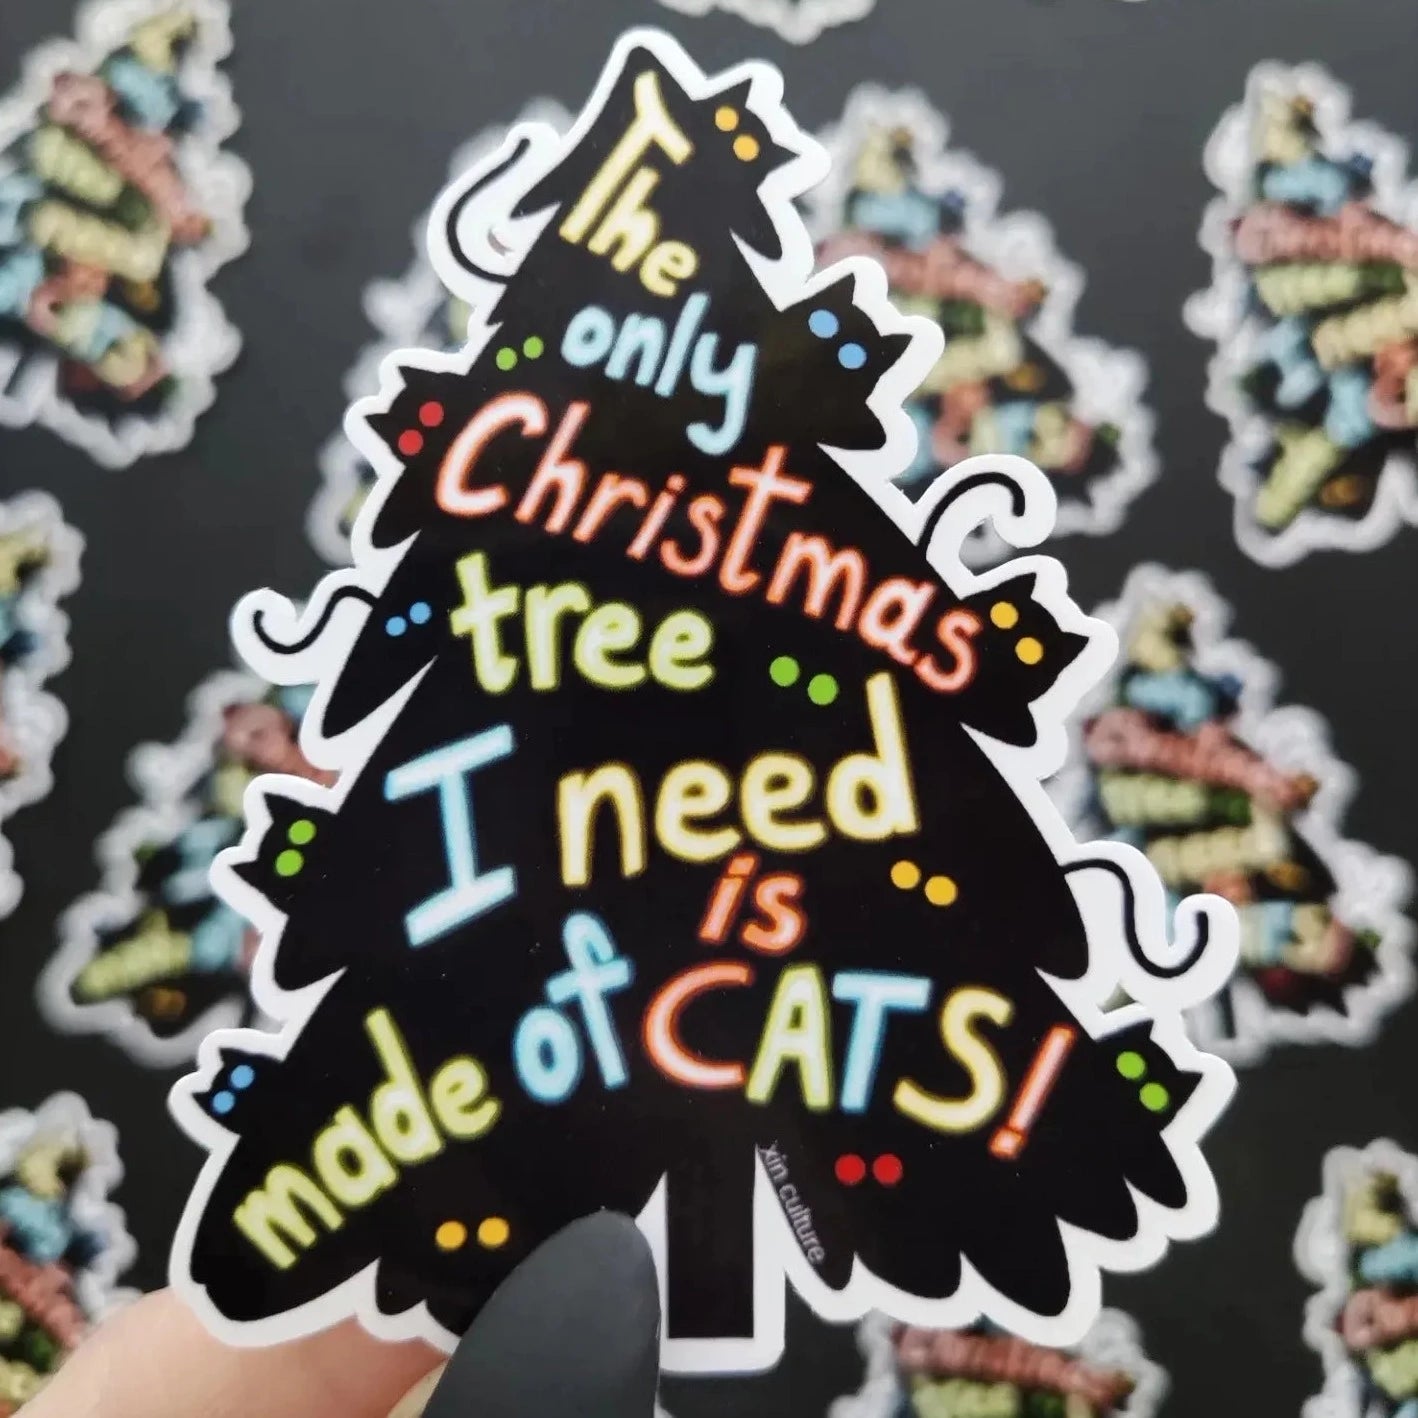 "The only Christmas tree I need is made of cats" sticker